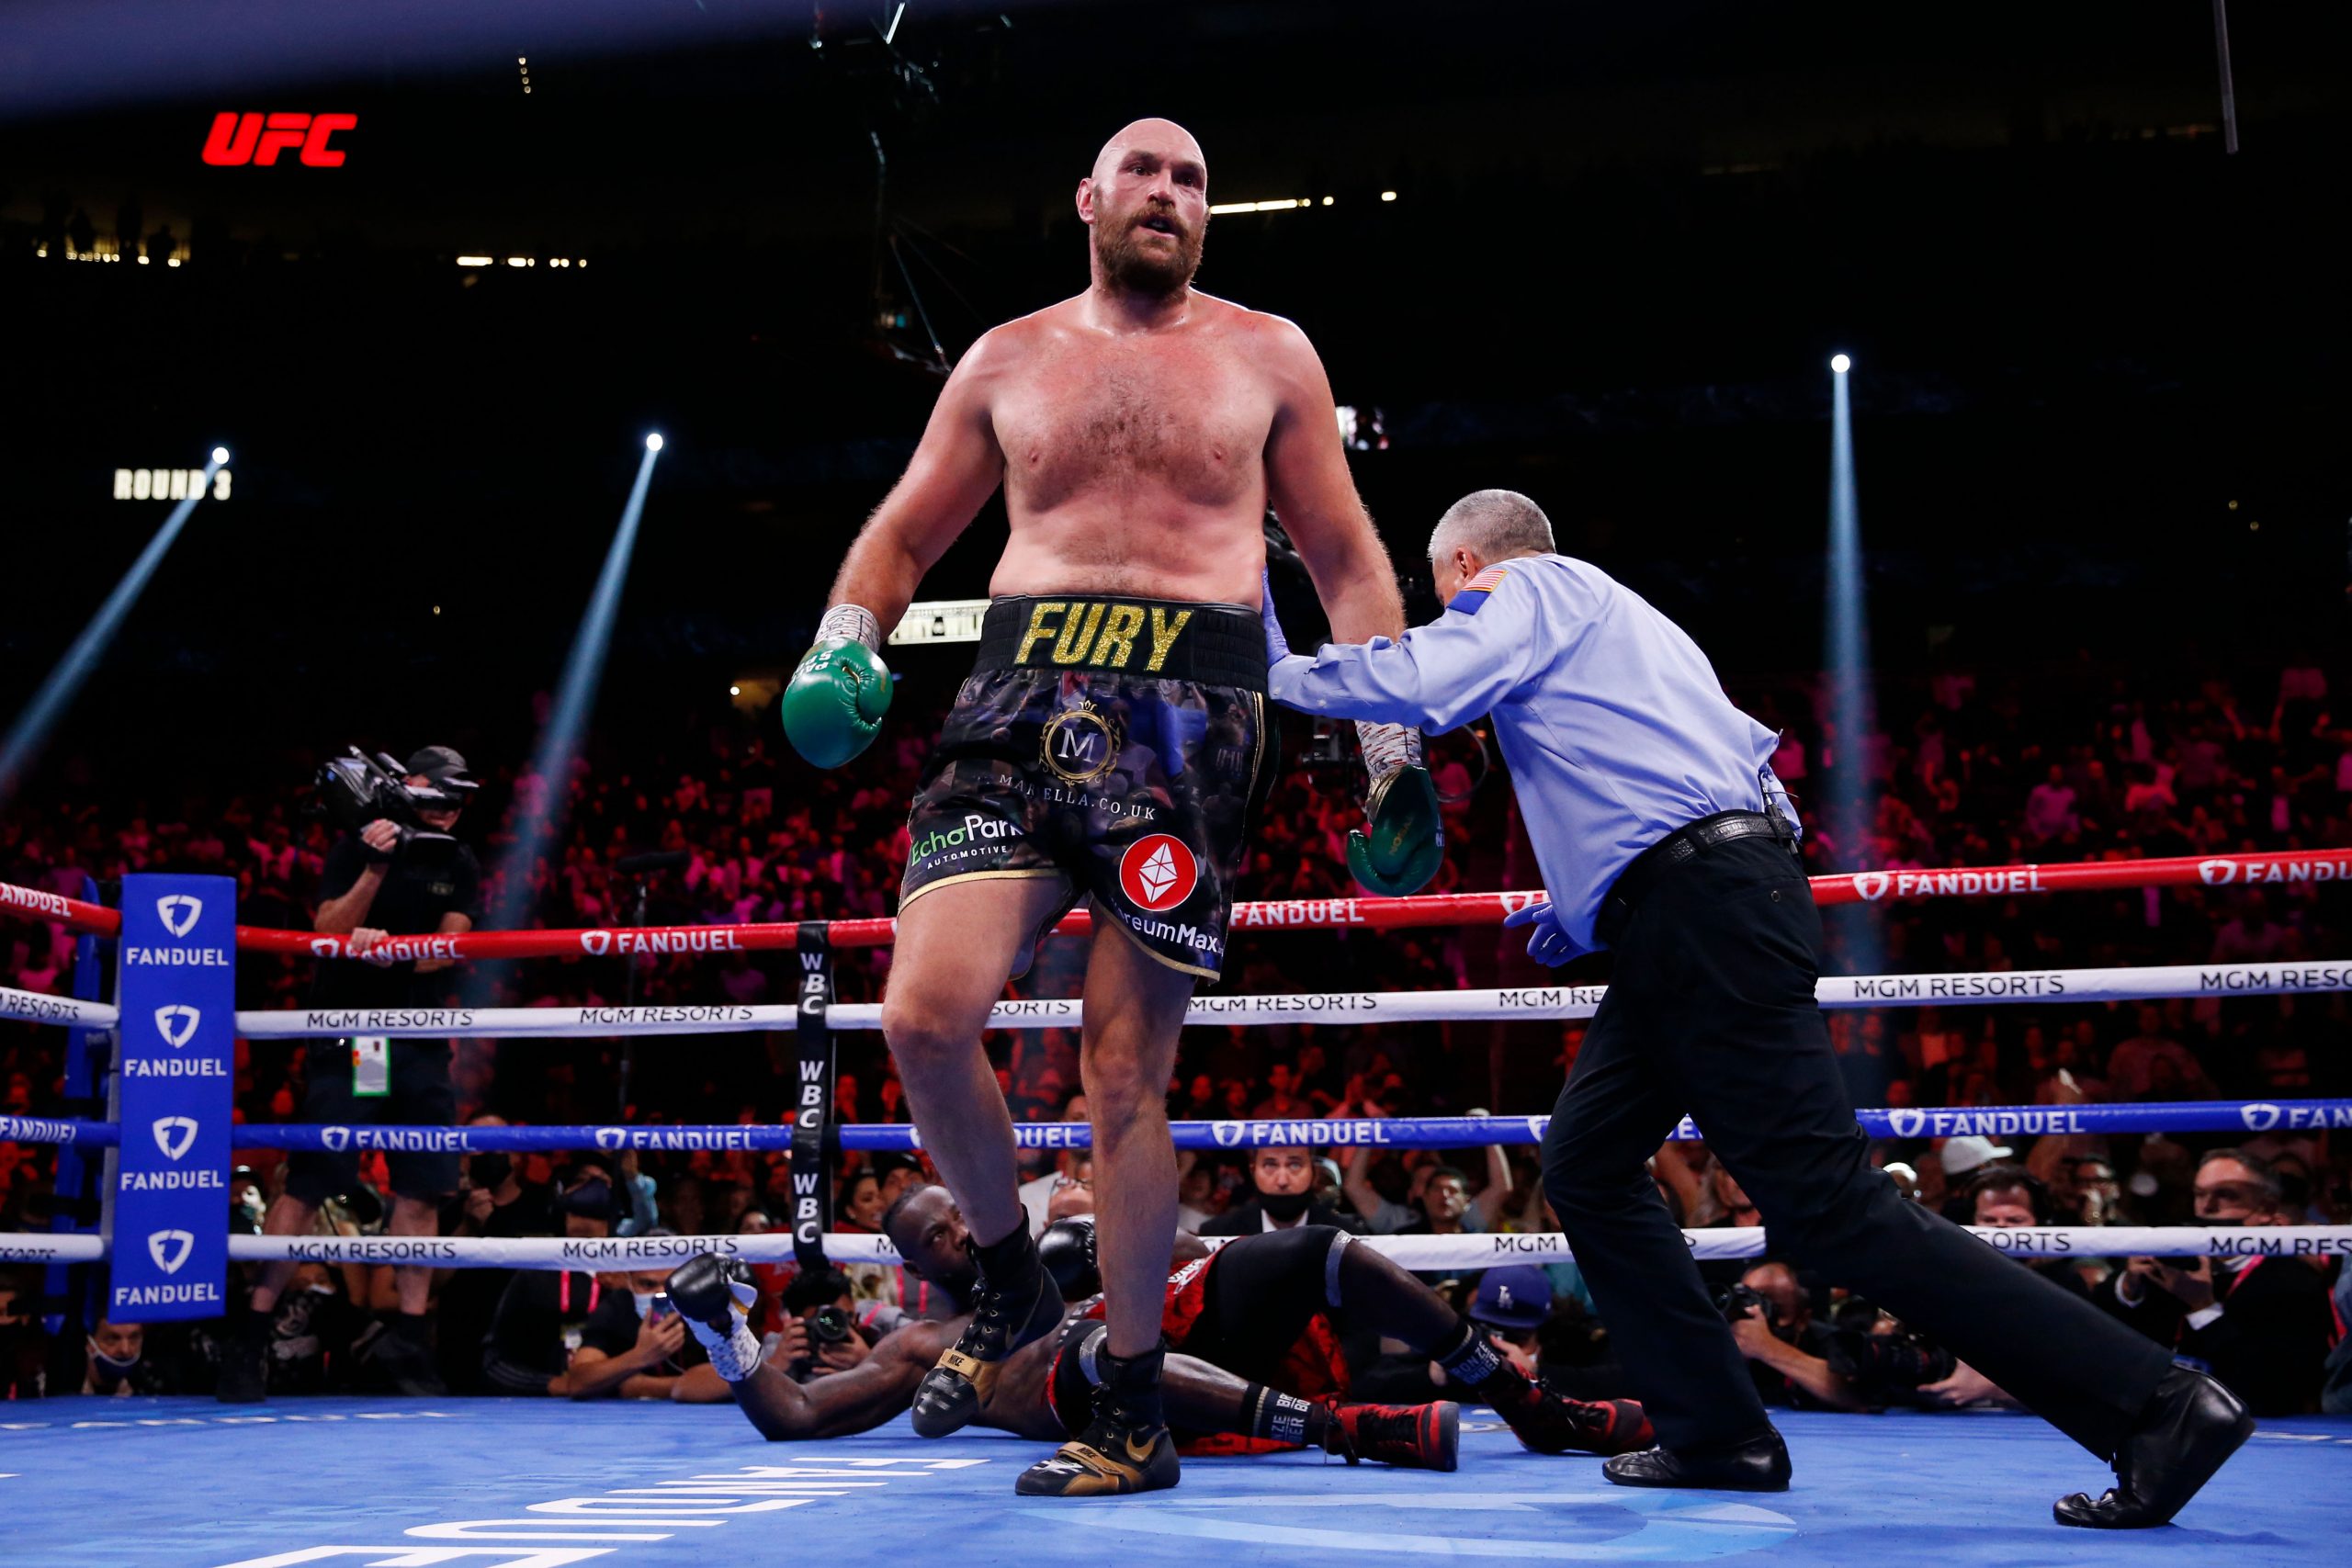 Fury knocks out Wilder to retain WBC and Lineal Heavyweight title